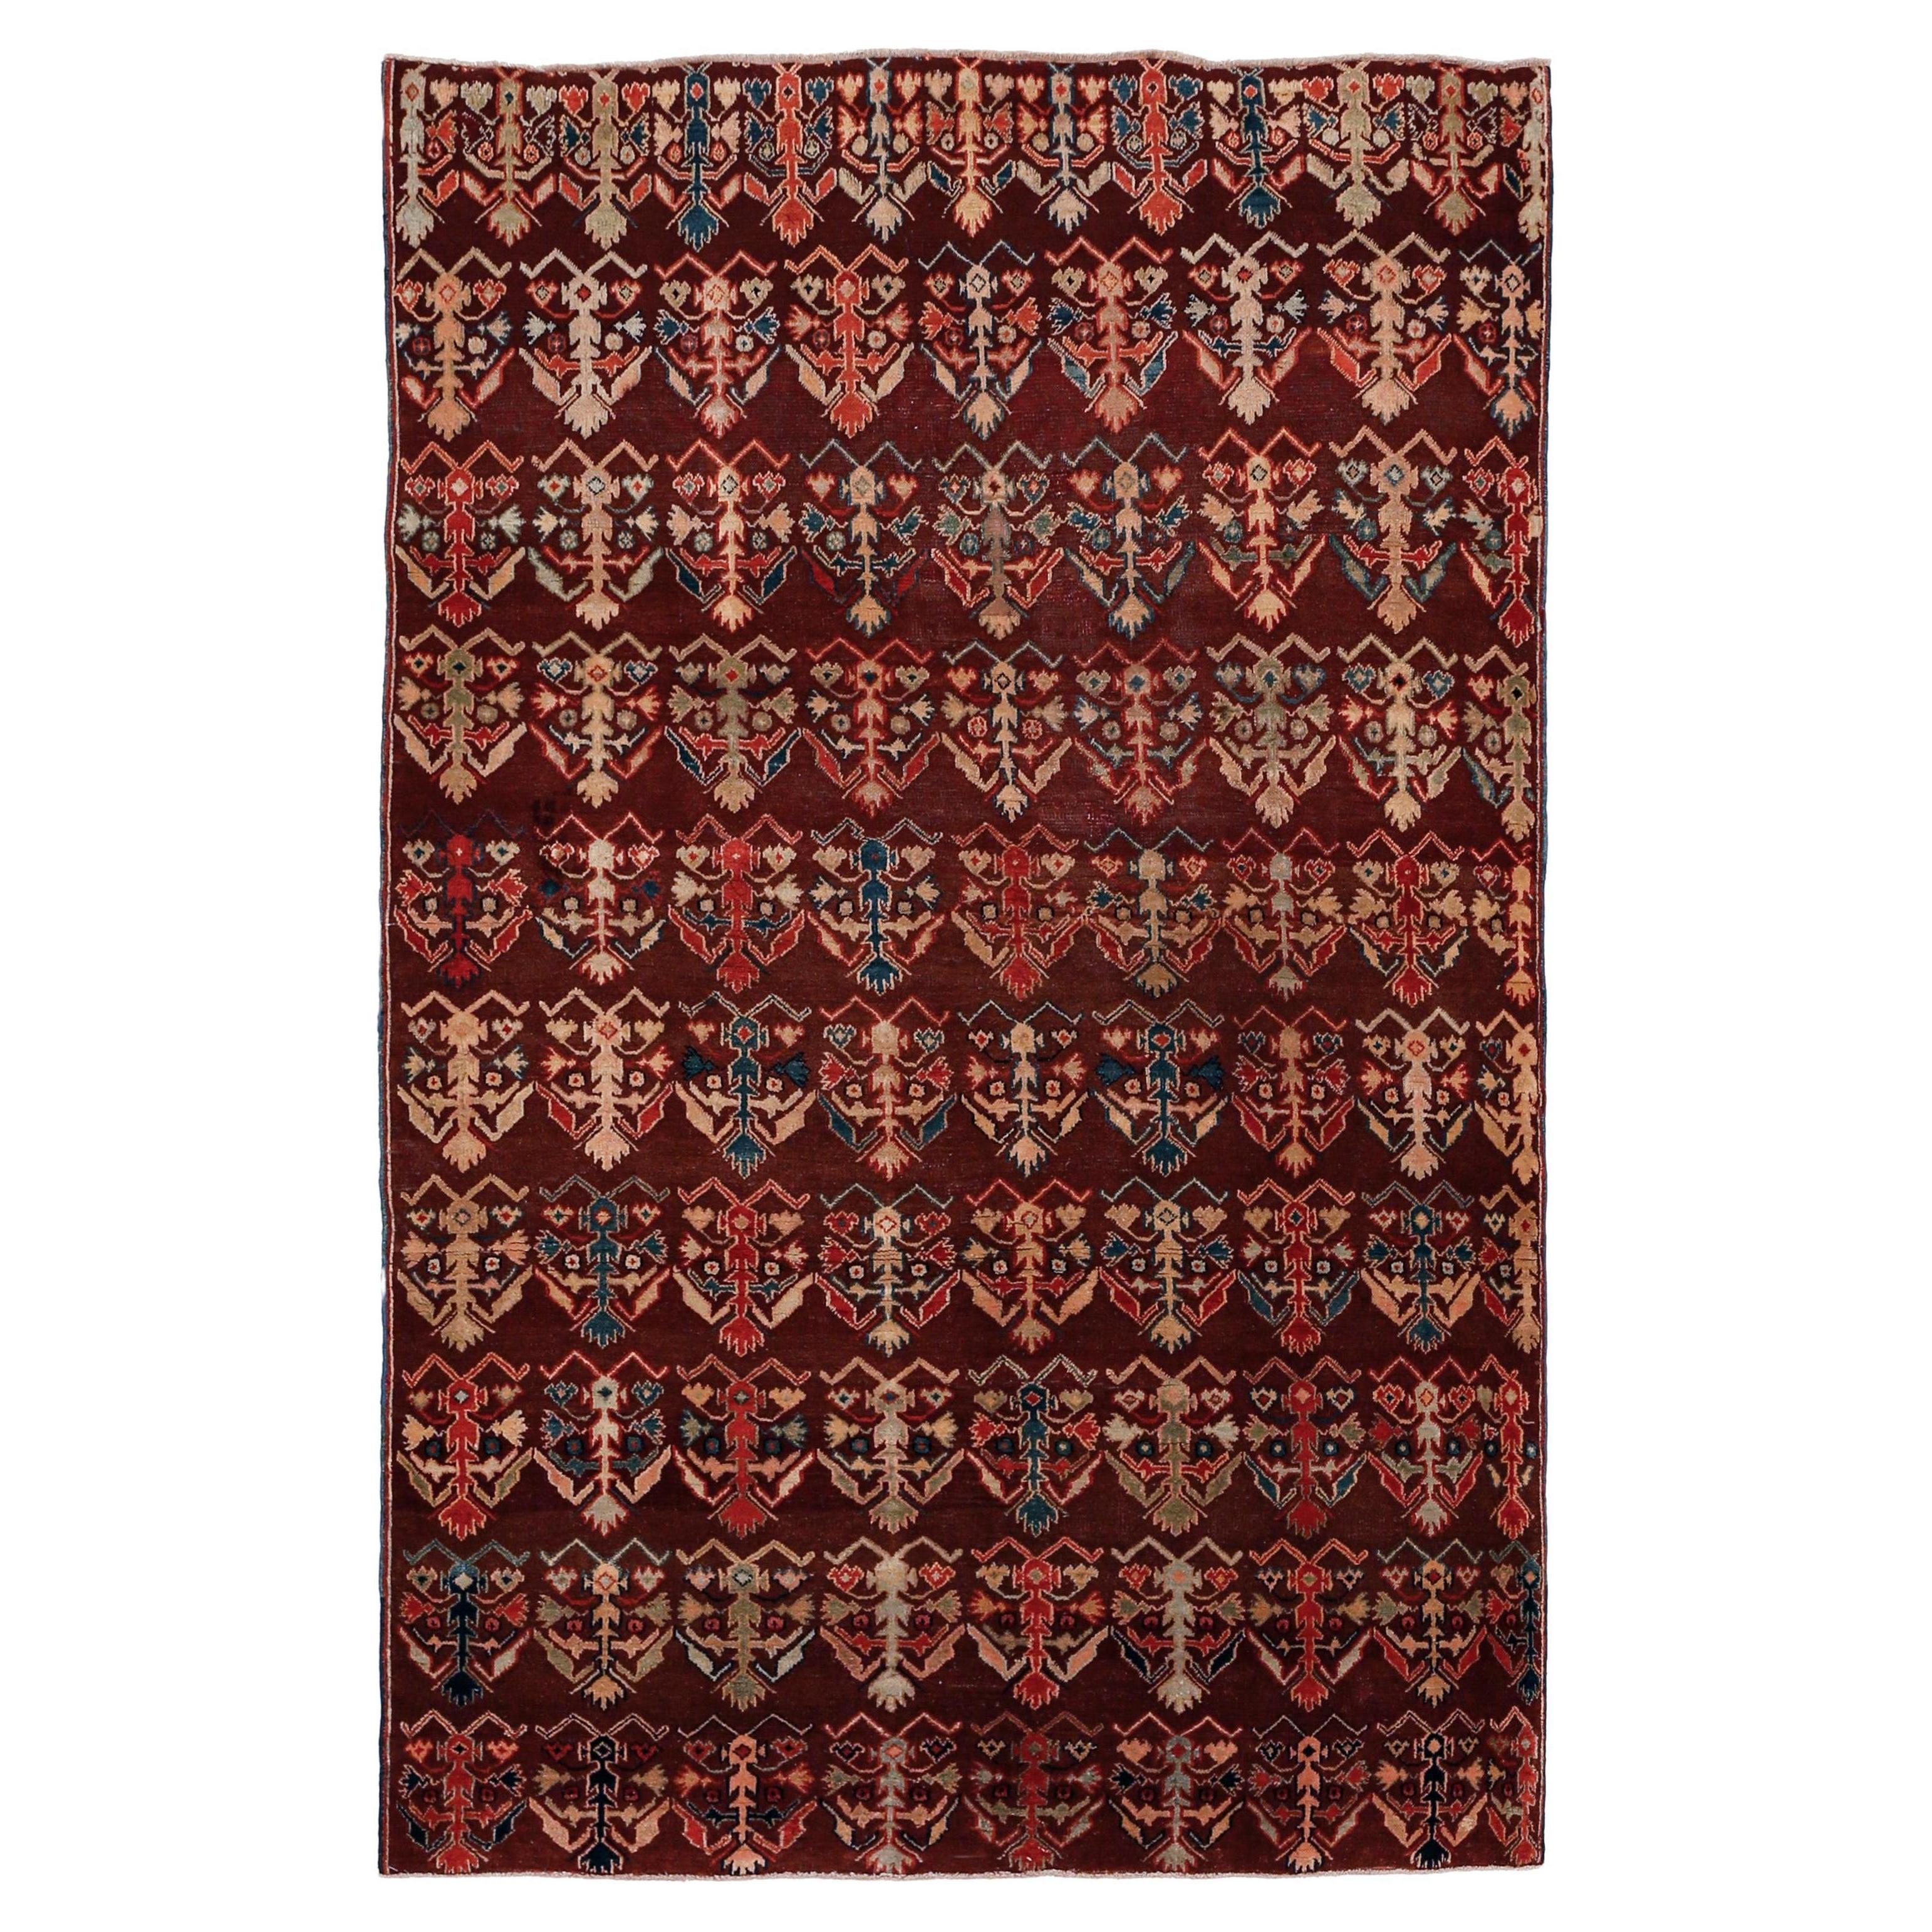 Fine Antique Agra Rug with All-Over Shrub Pattern on a Maroon Background